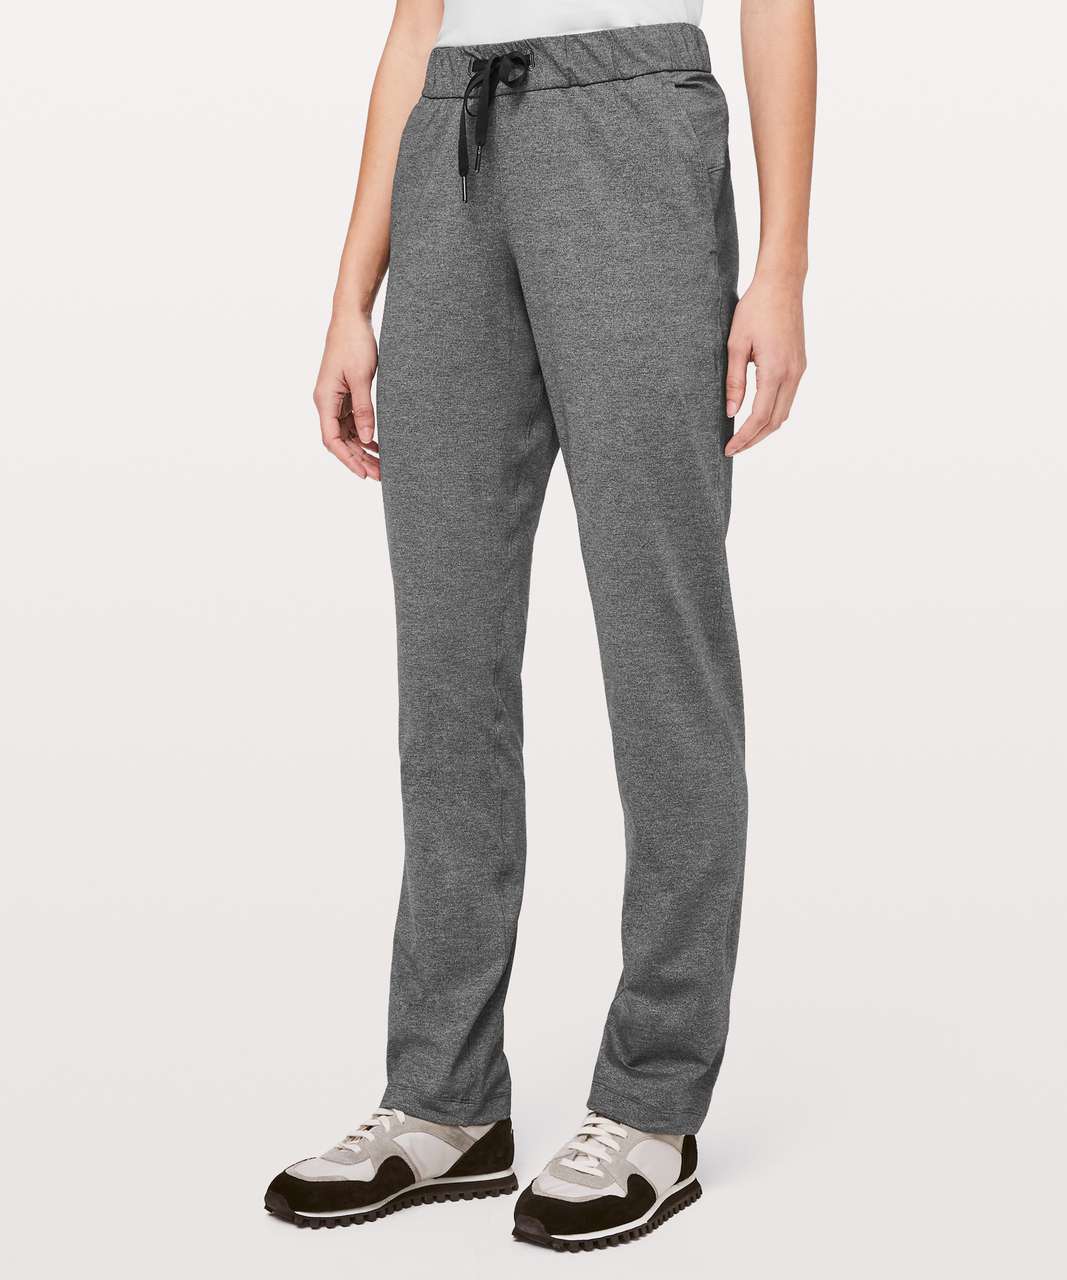 On the Fly Pant - Heathered black  Lululemon outfits, On the fly